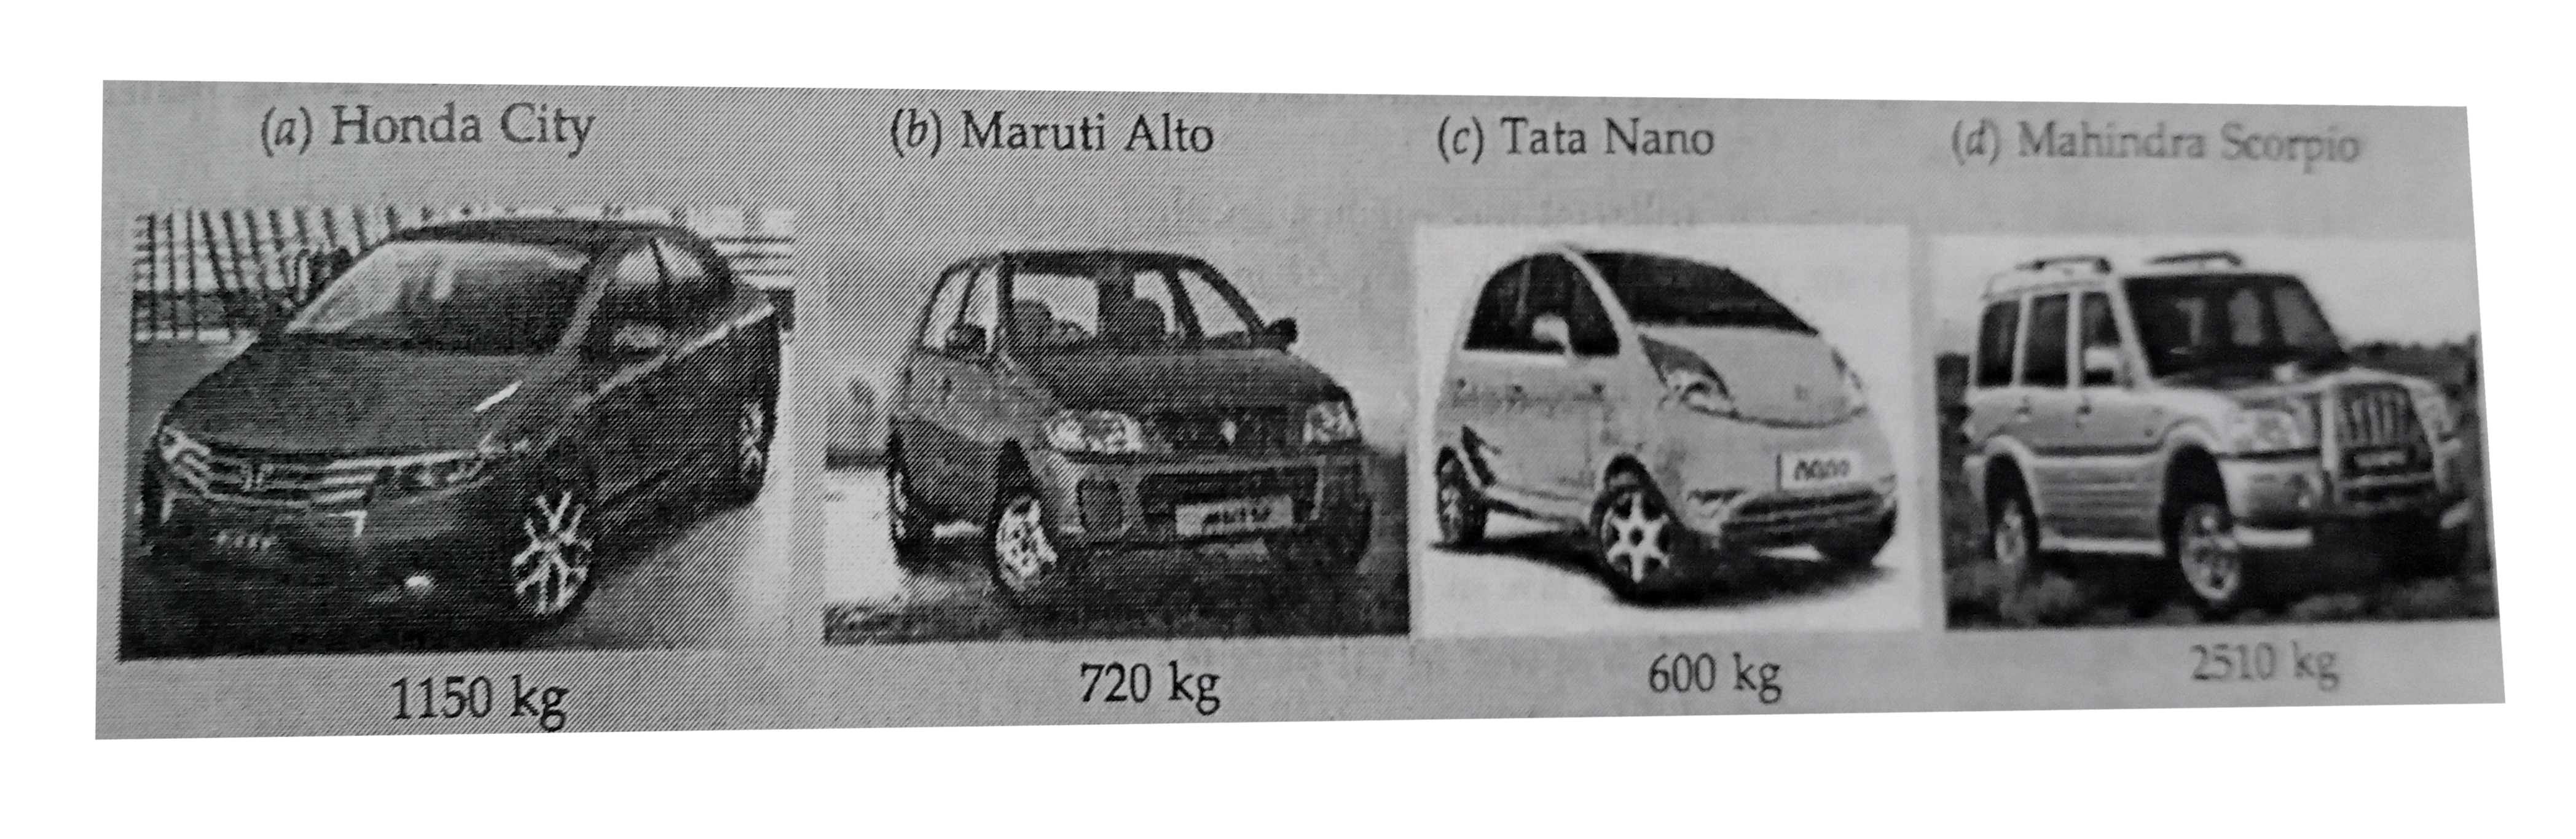 A Honda city car, a Maruti Alto car, a Tata Nano car and a Mahindra Scorpio car, all are running at the same conditions. If all these cars are hit from behined with the same force and they continue to move forward, the maximum acceleration will be produced in :